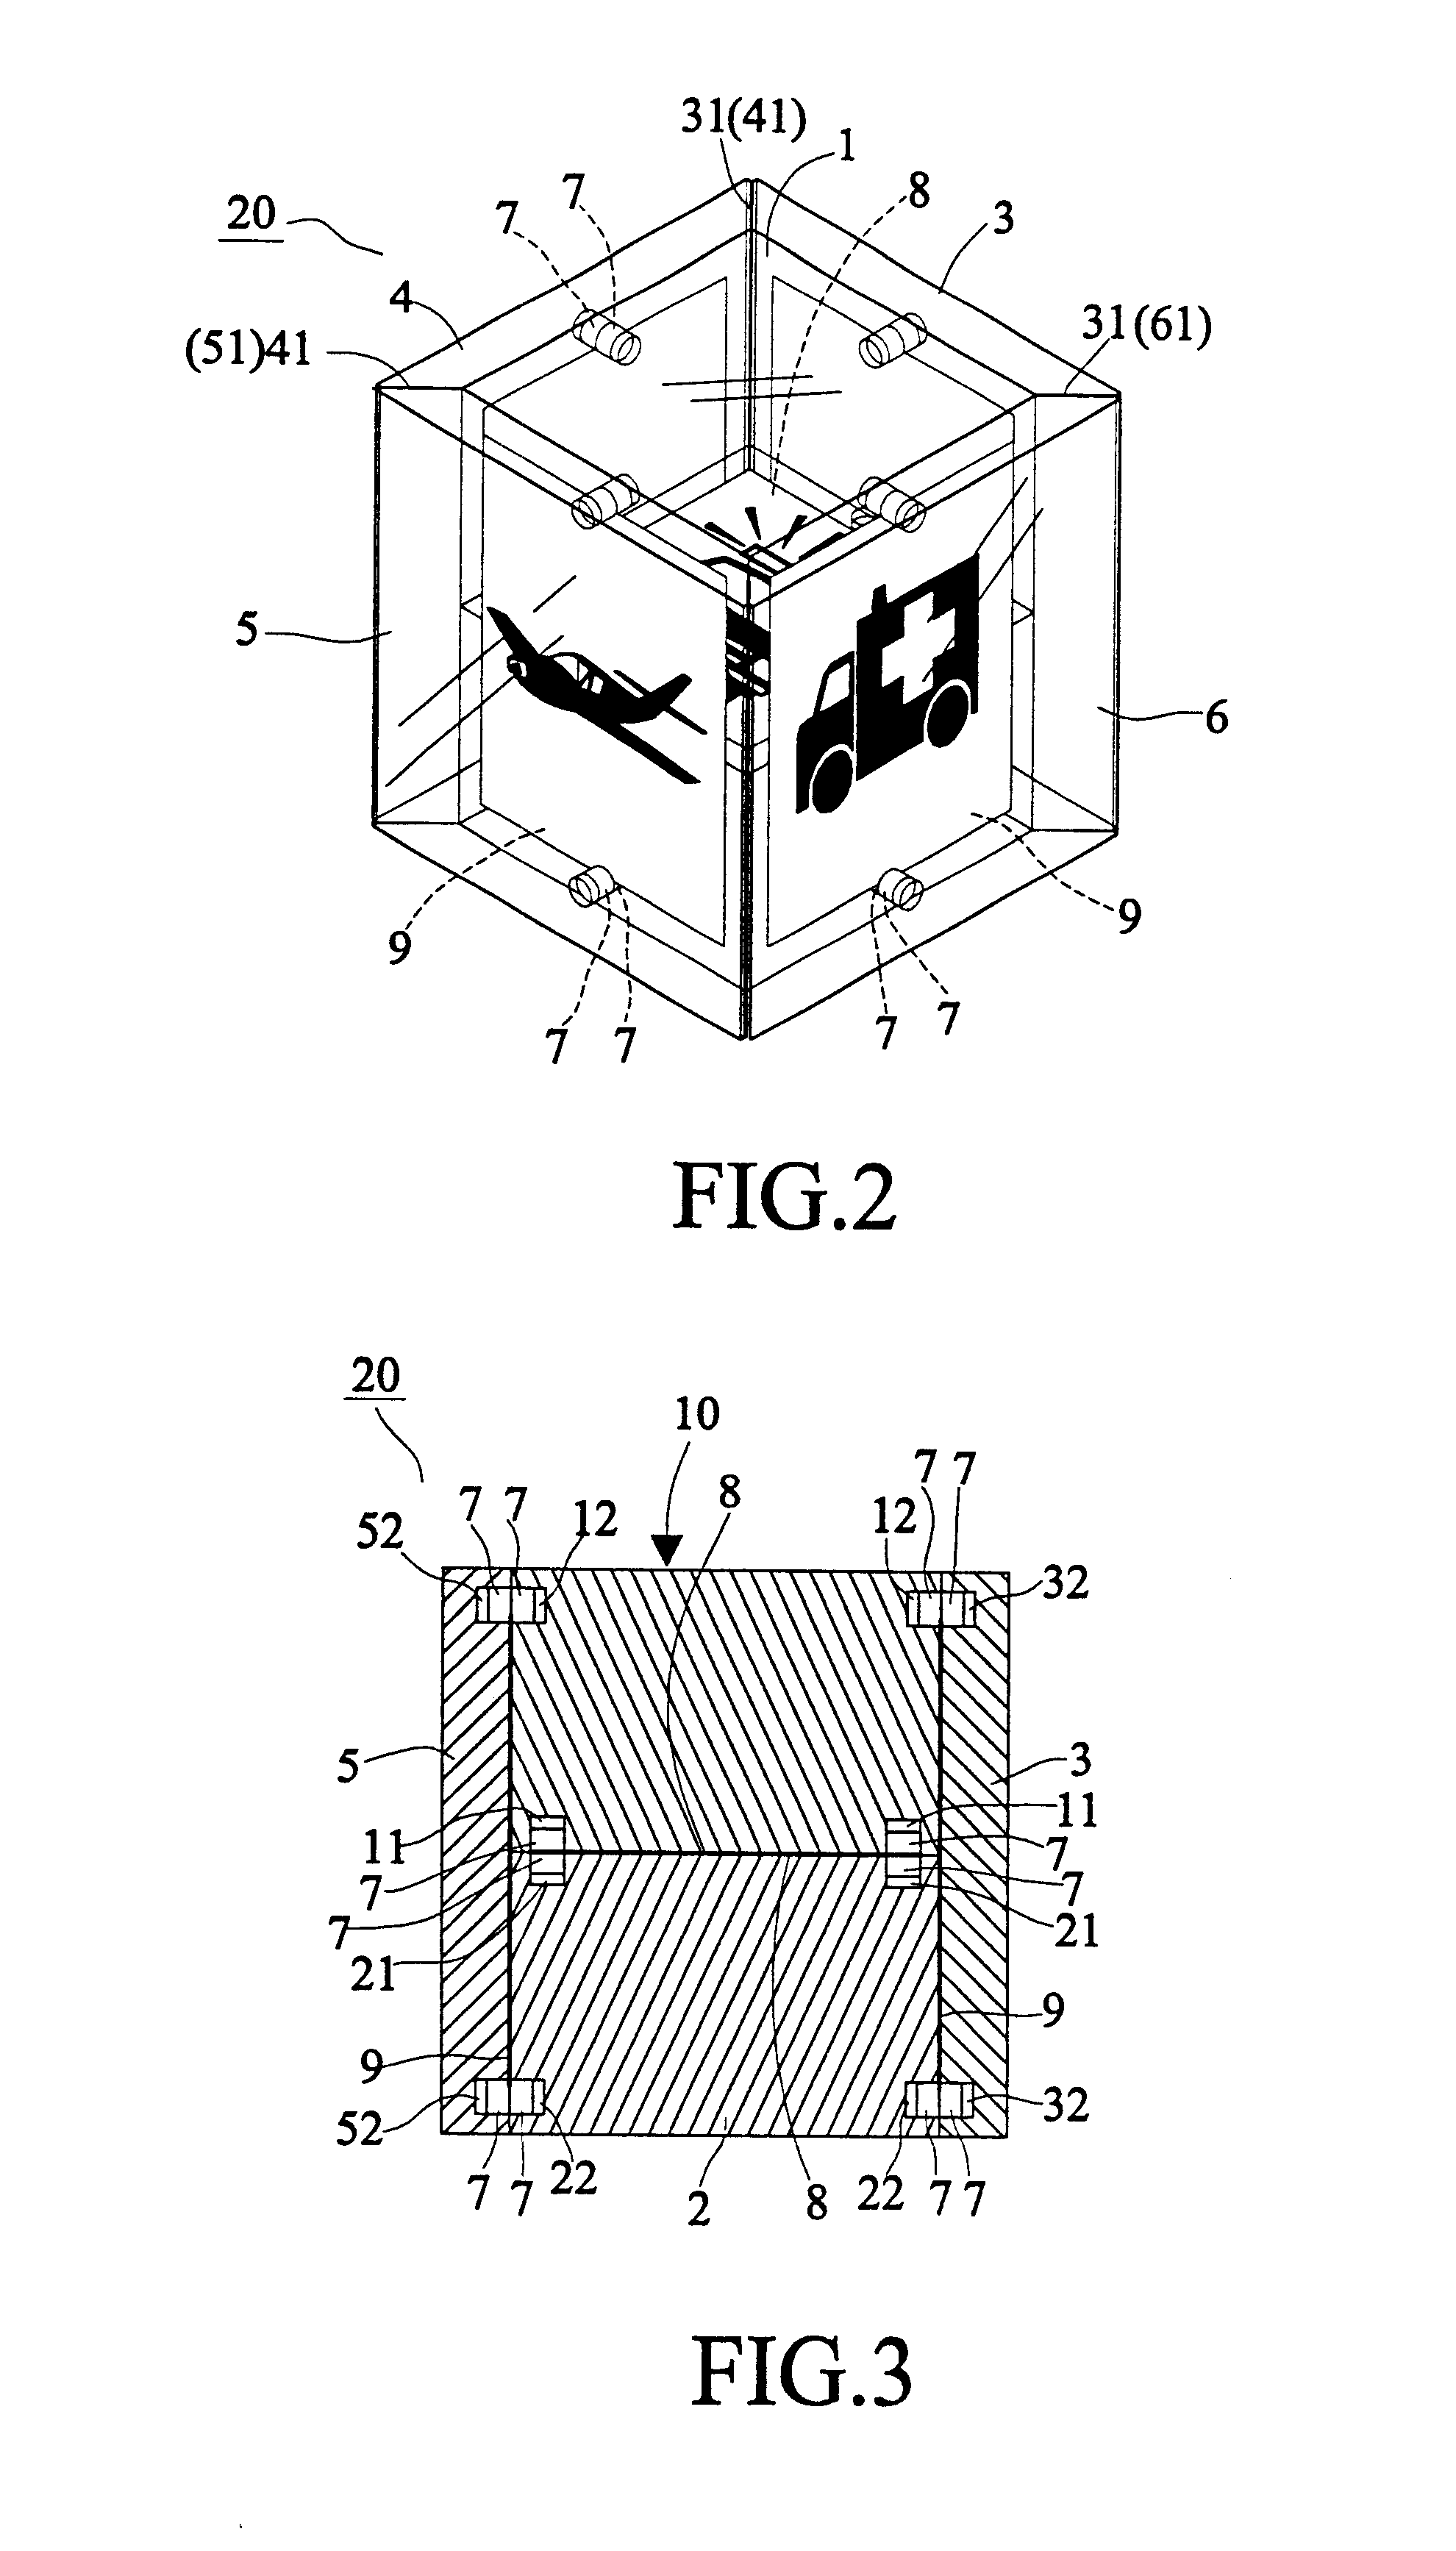 Transparent cube having picture displaying function